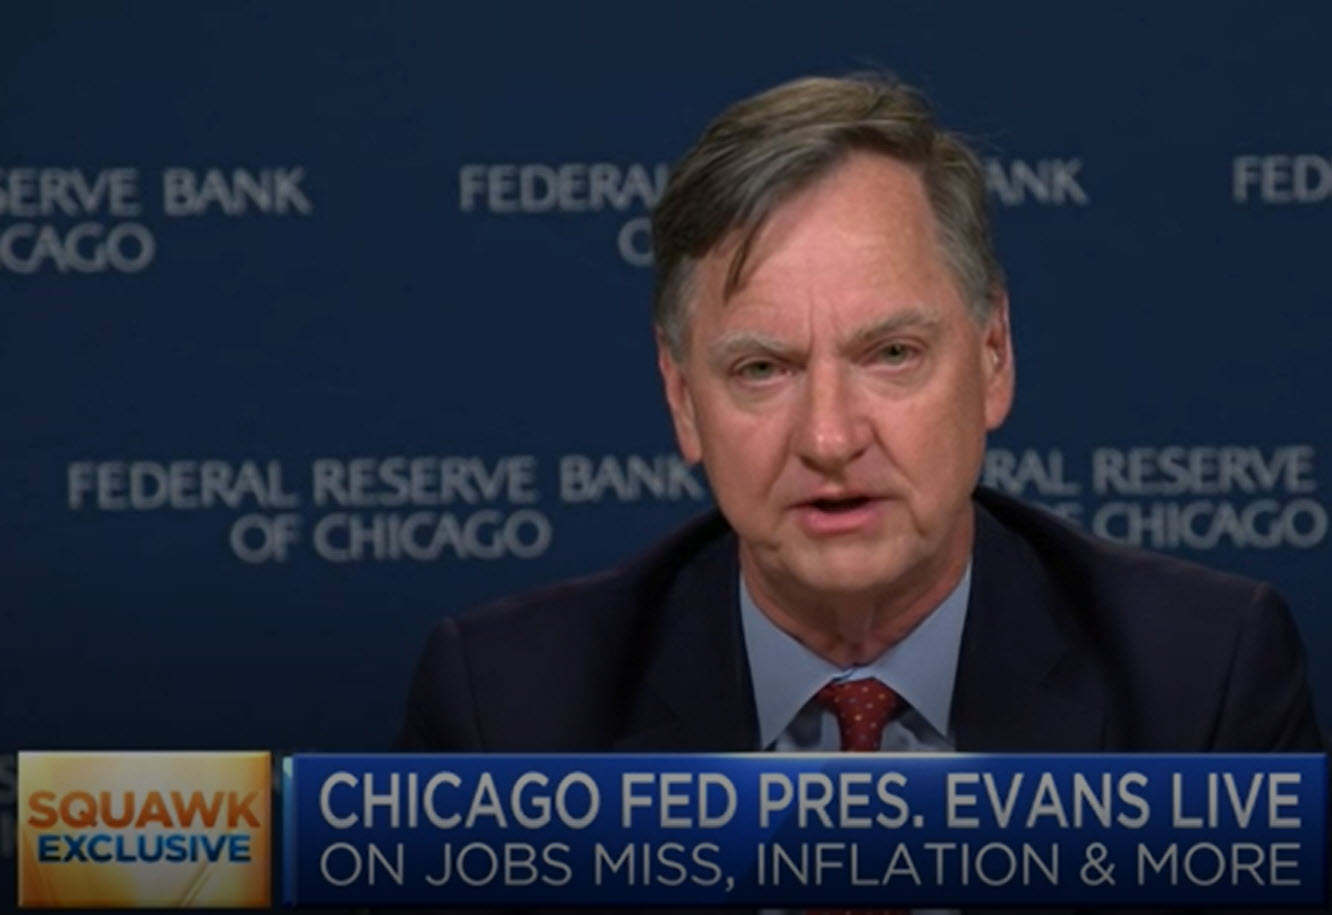 Chicago Fedss Evans speaking again (was on CNBC earlier today)